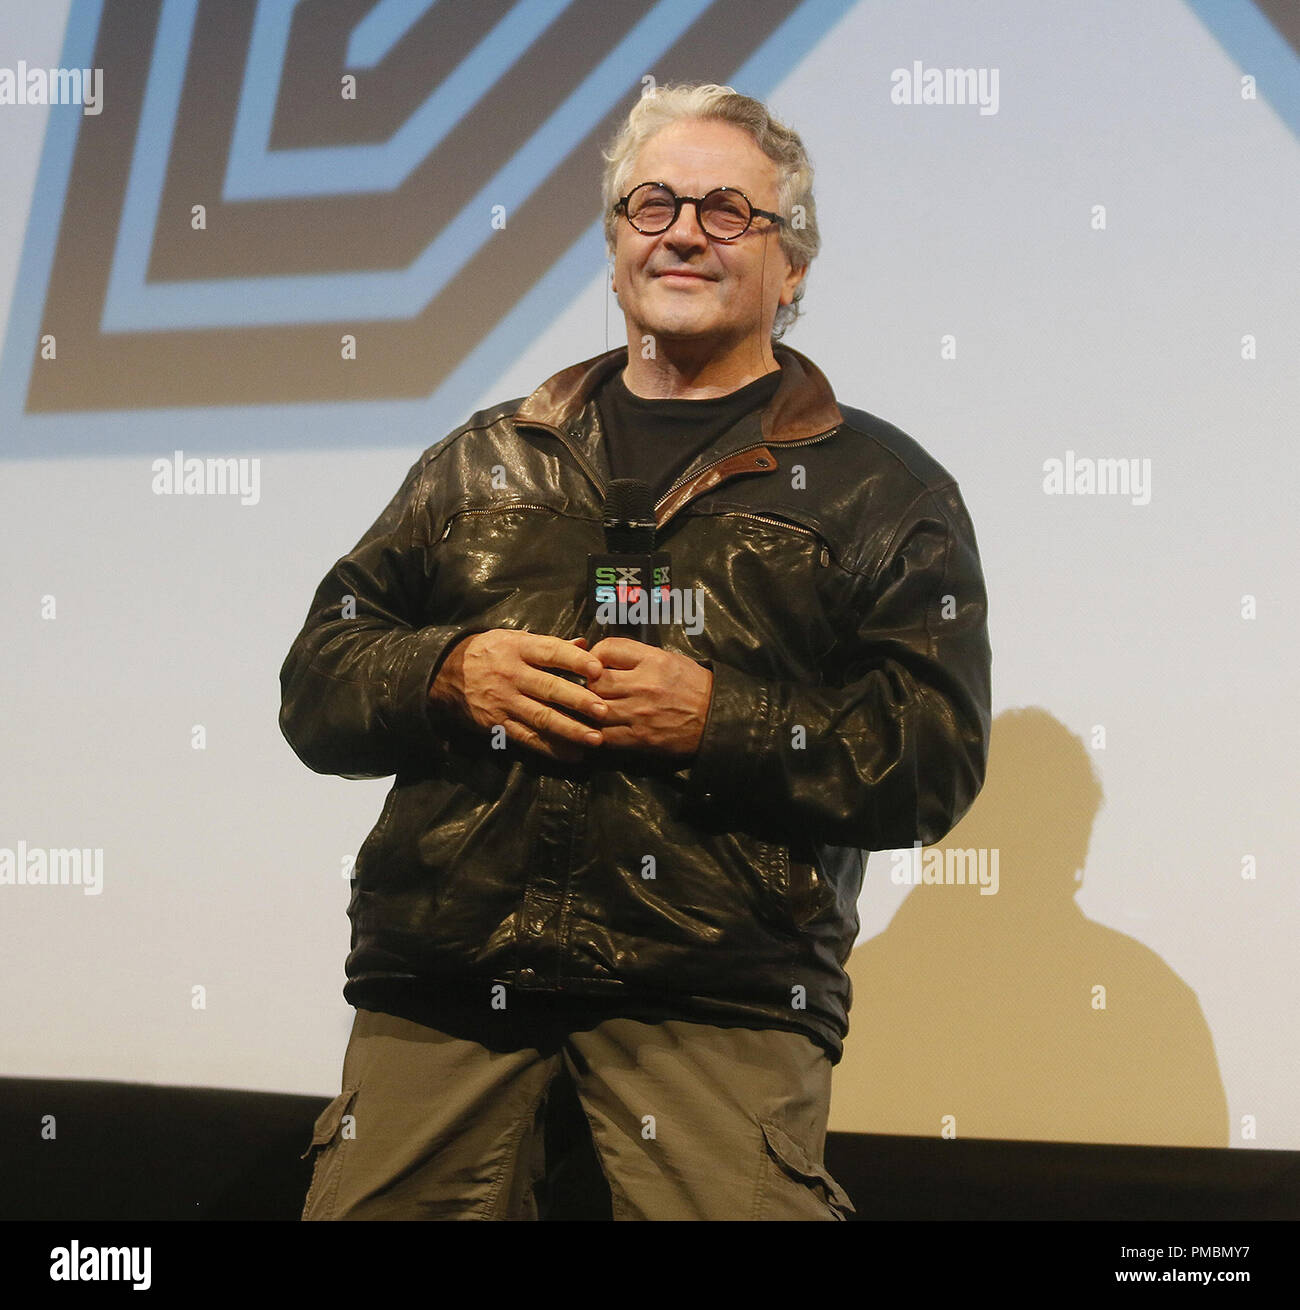 'The Road Warrior' director George Miller at a Q&A session following a screening of the movie during the SXSW Film Festival on Monday, March 16, 2015 in Austin, Texas Stock Photo